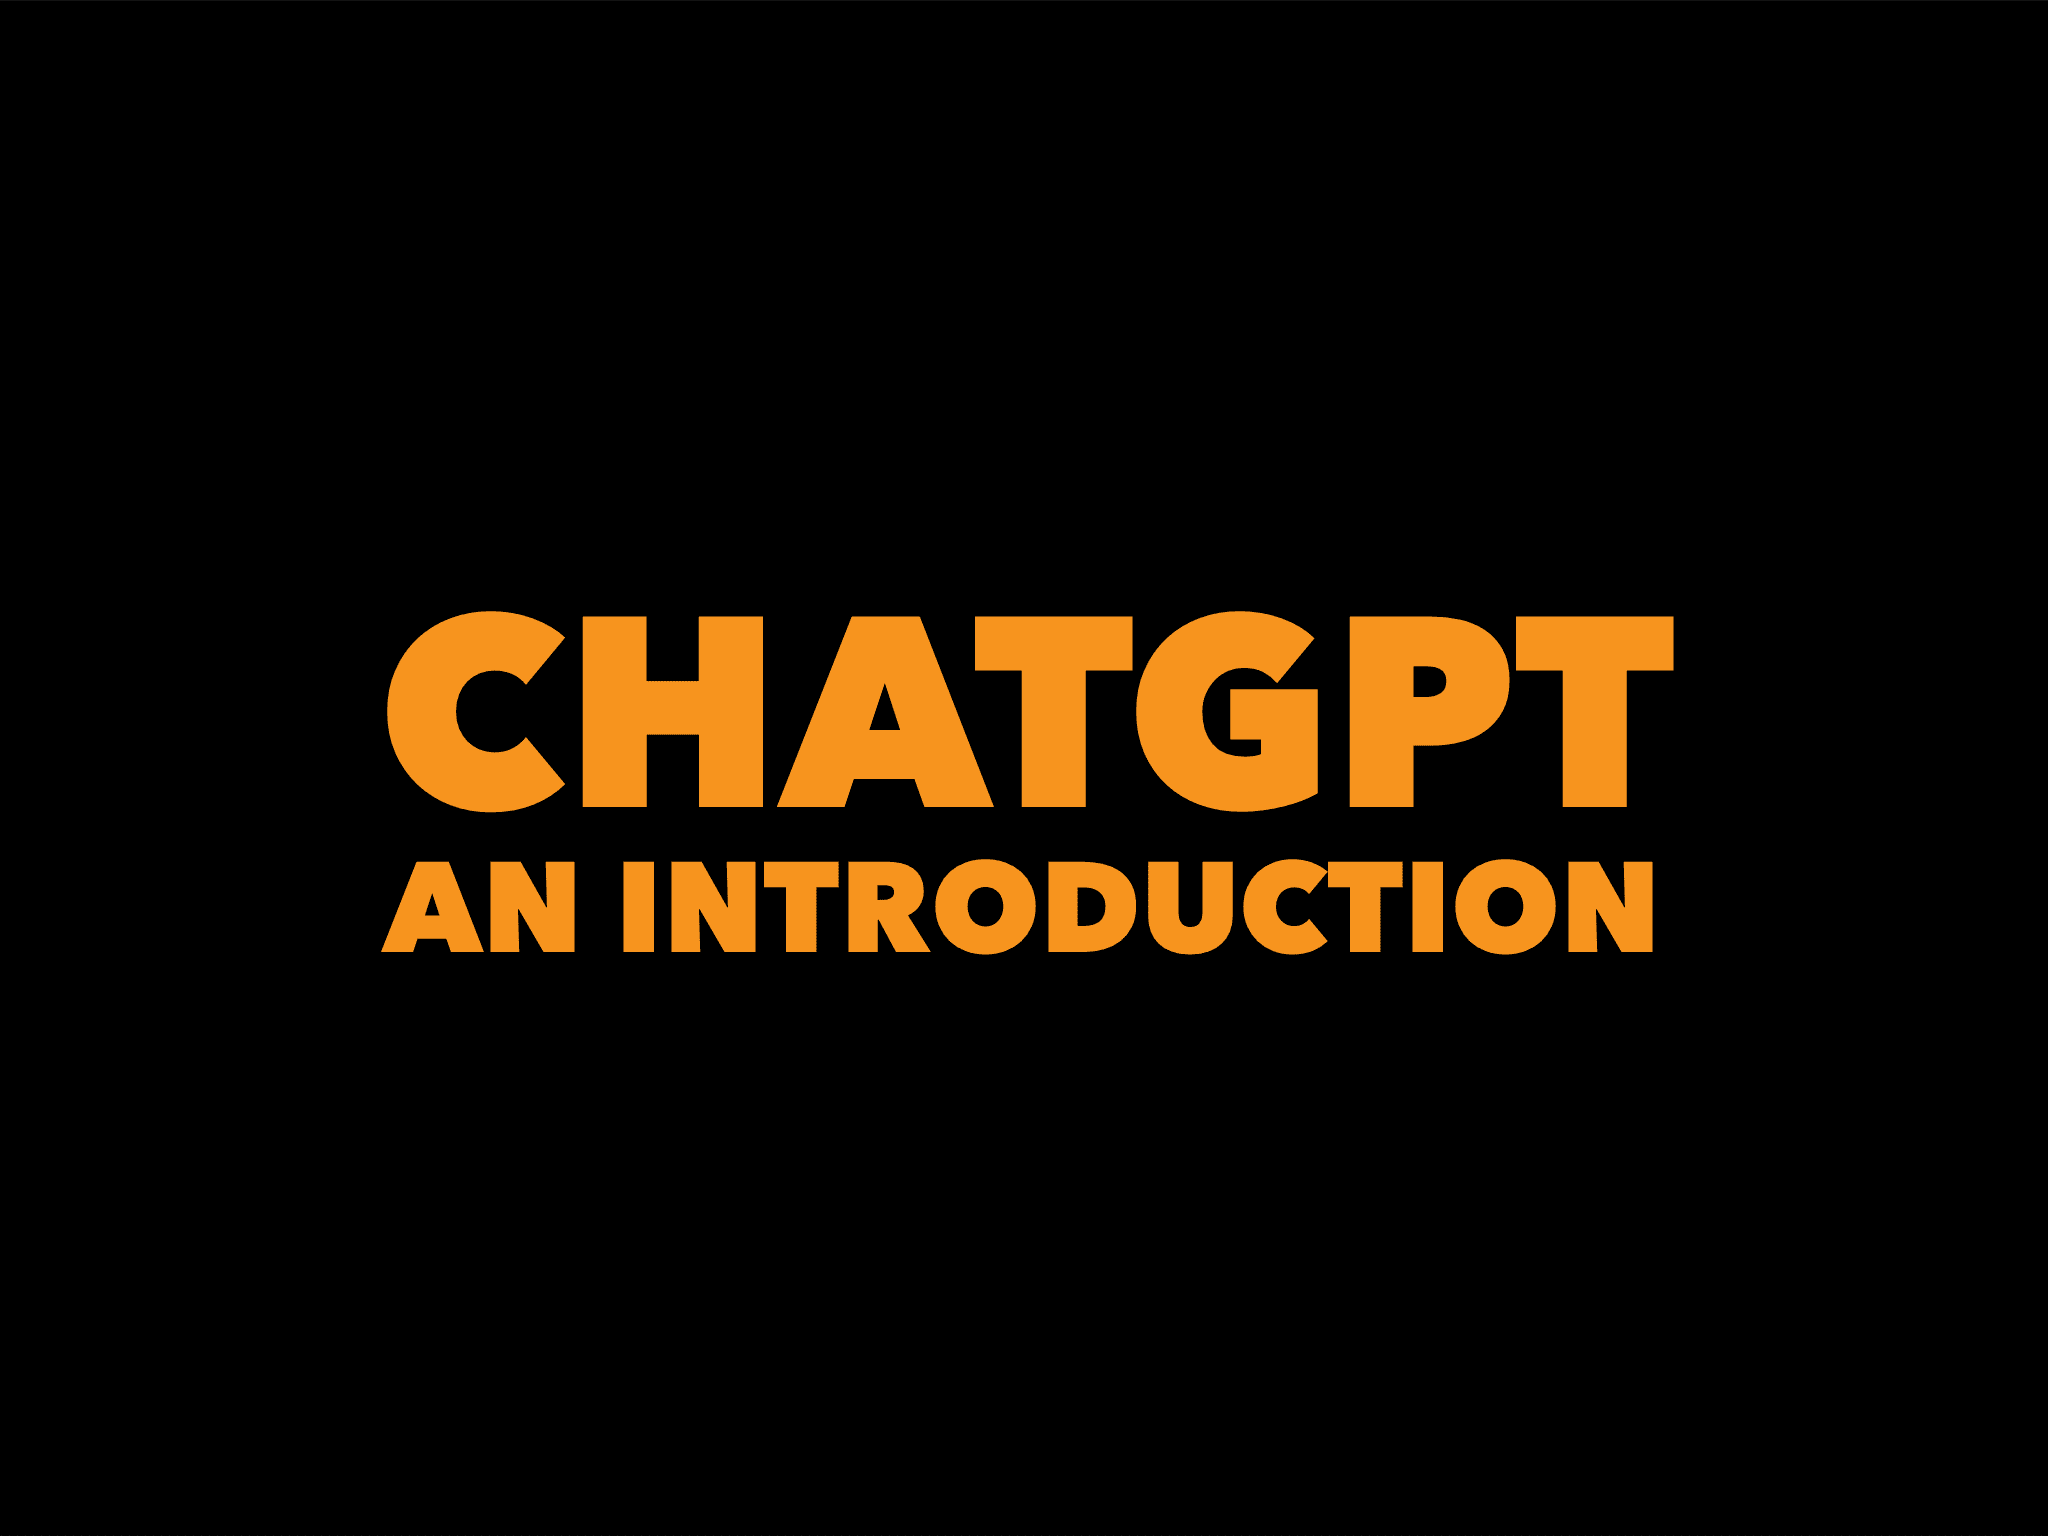 CHATGPT: An introduction